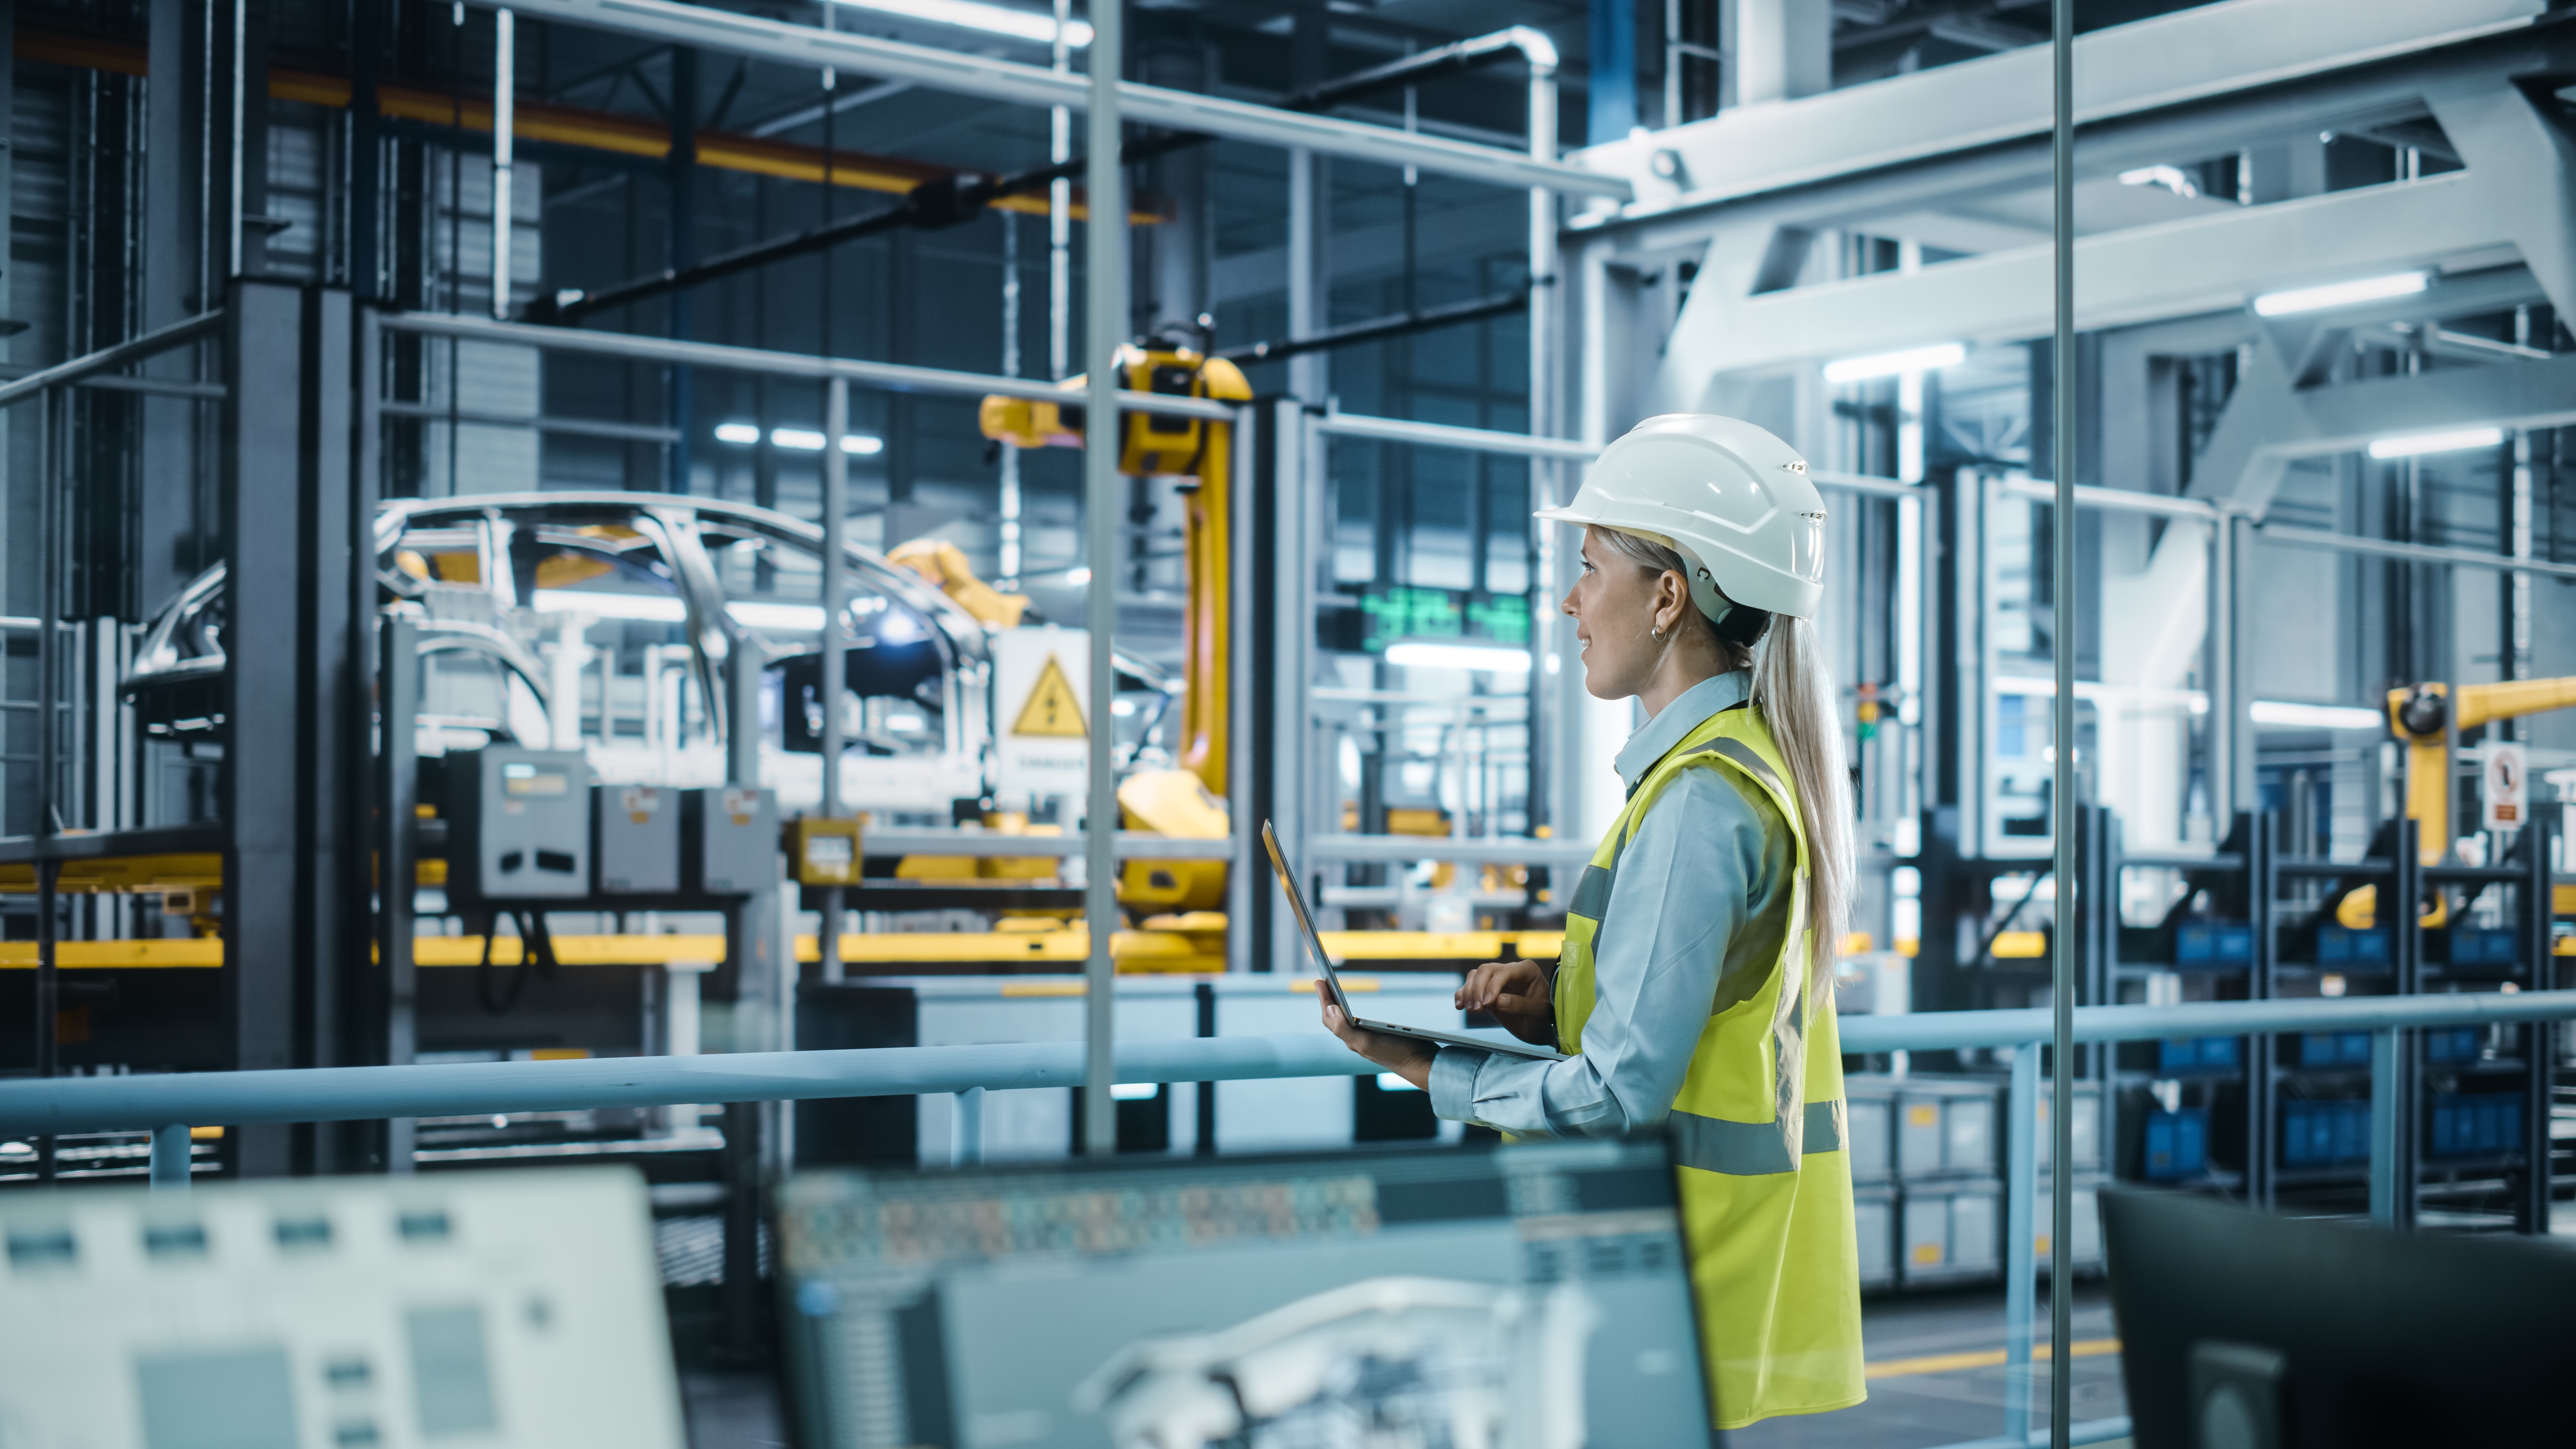 stock photo of someone working in a high-tech factory wearing a reflective vest